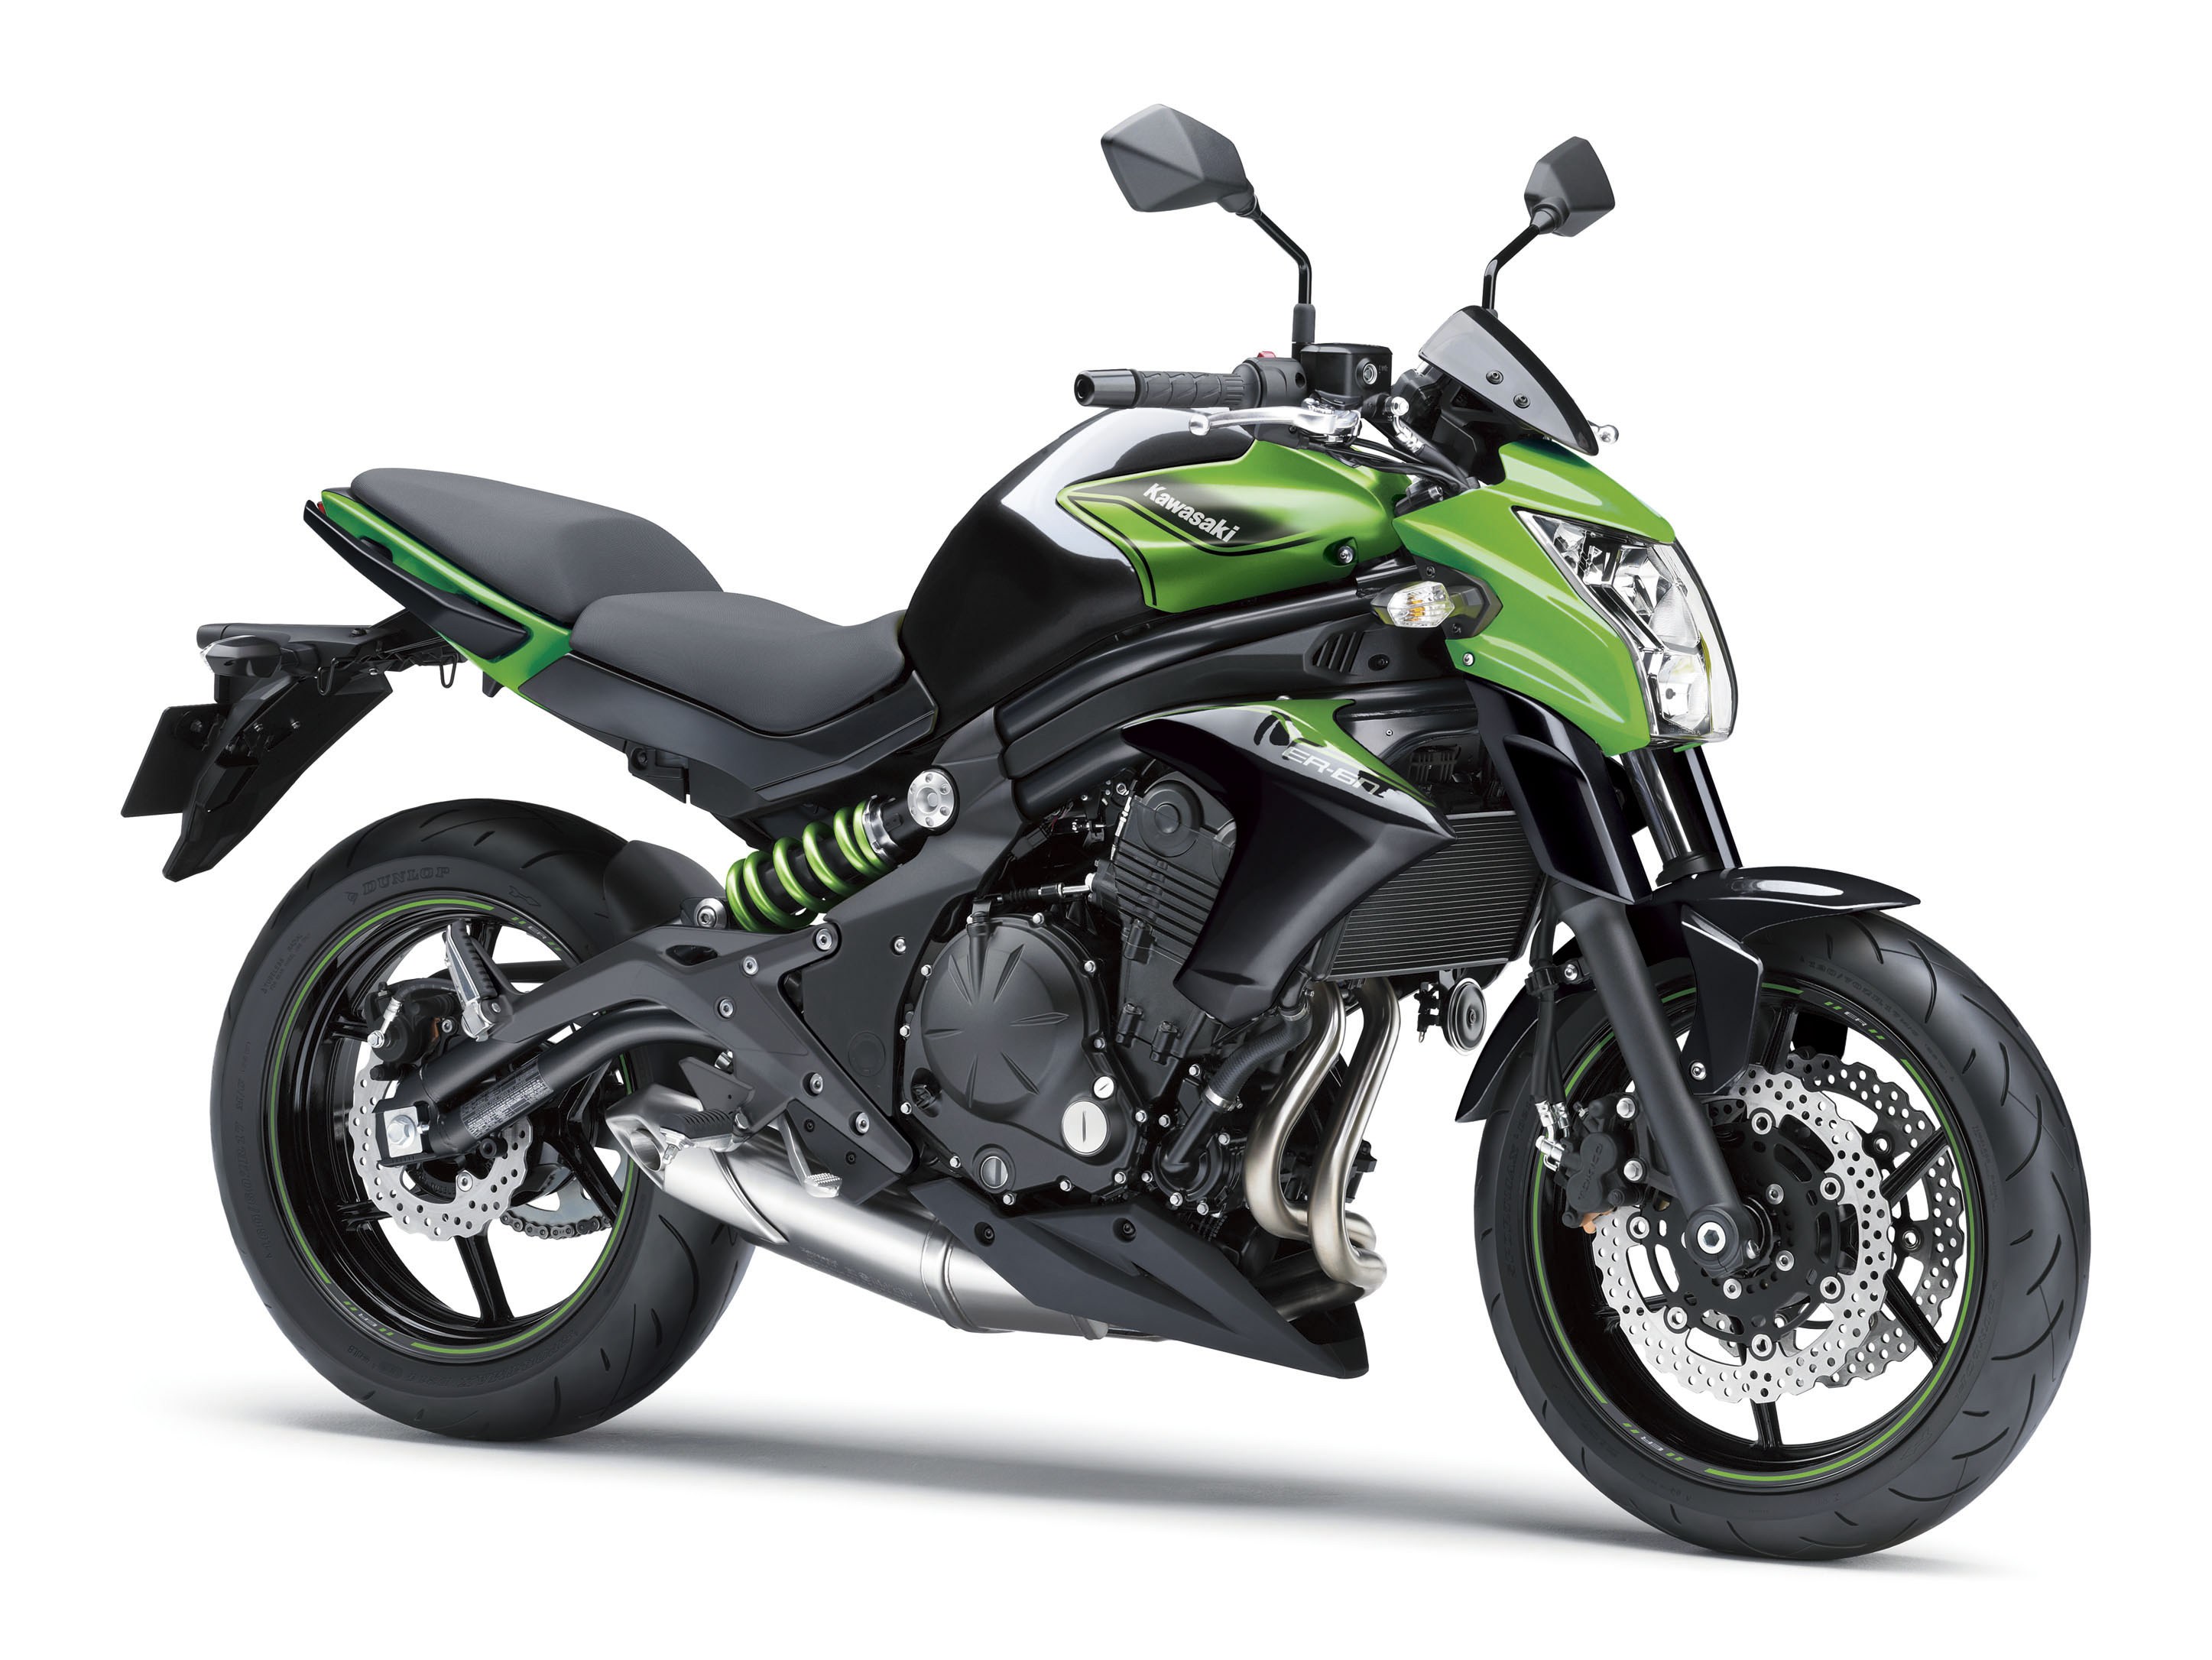 New colours for 2016 Kawasaki ER-6 range plus Vulcan S and Versys 650